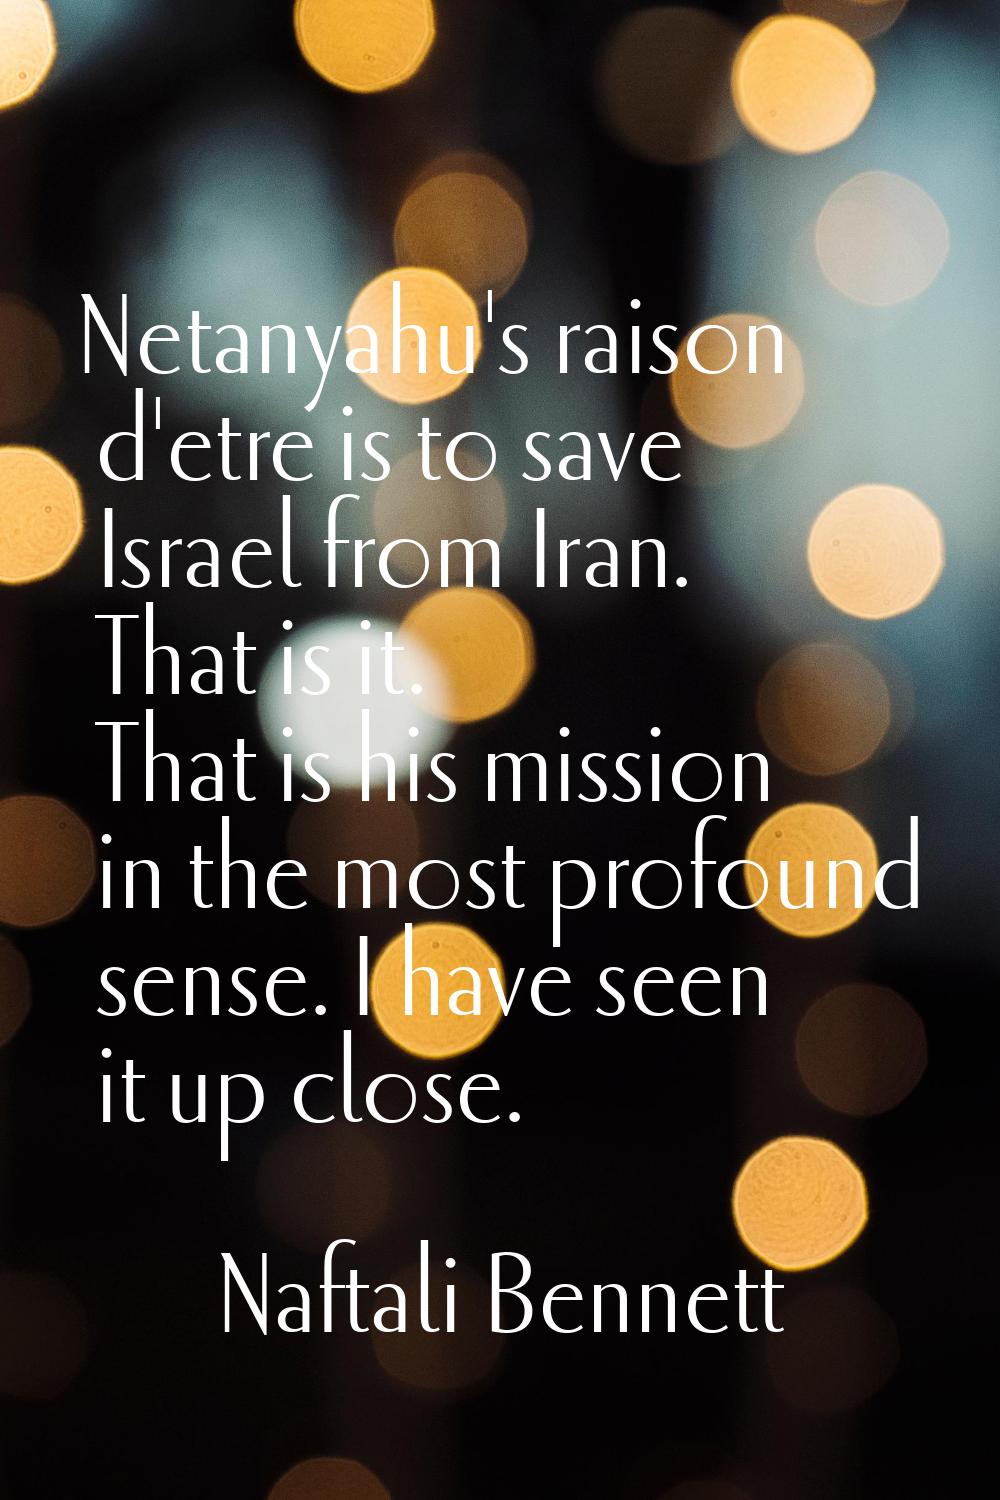 Netanyahu's raison d'etre is to save Israel from Iran. That is it. That is his mission in the most 